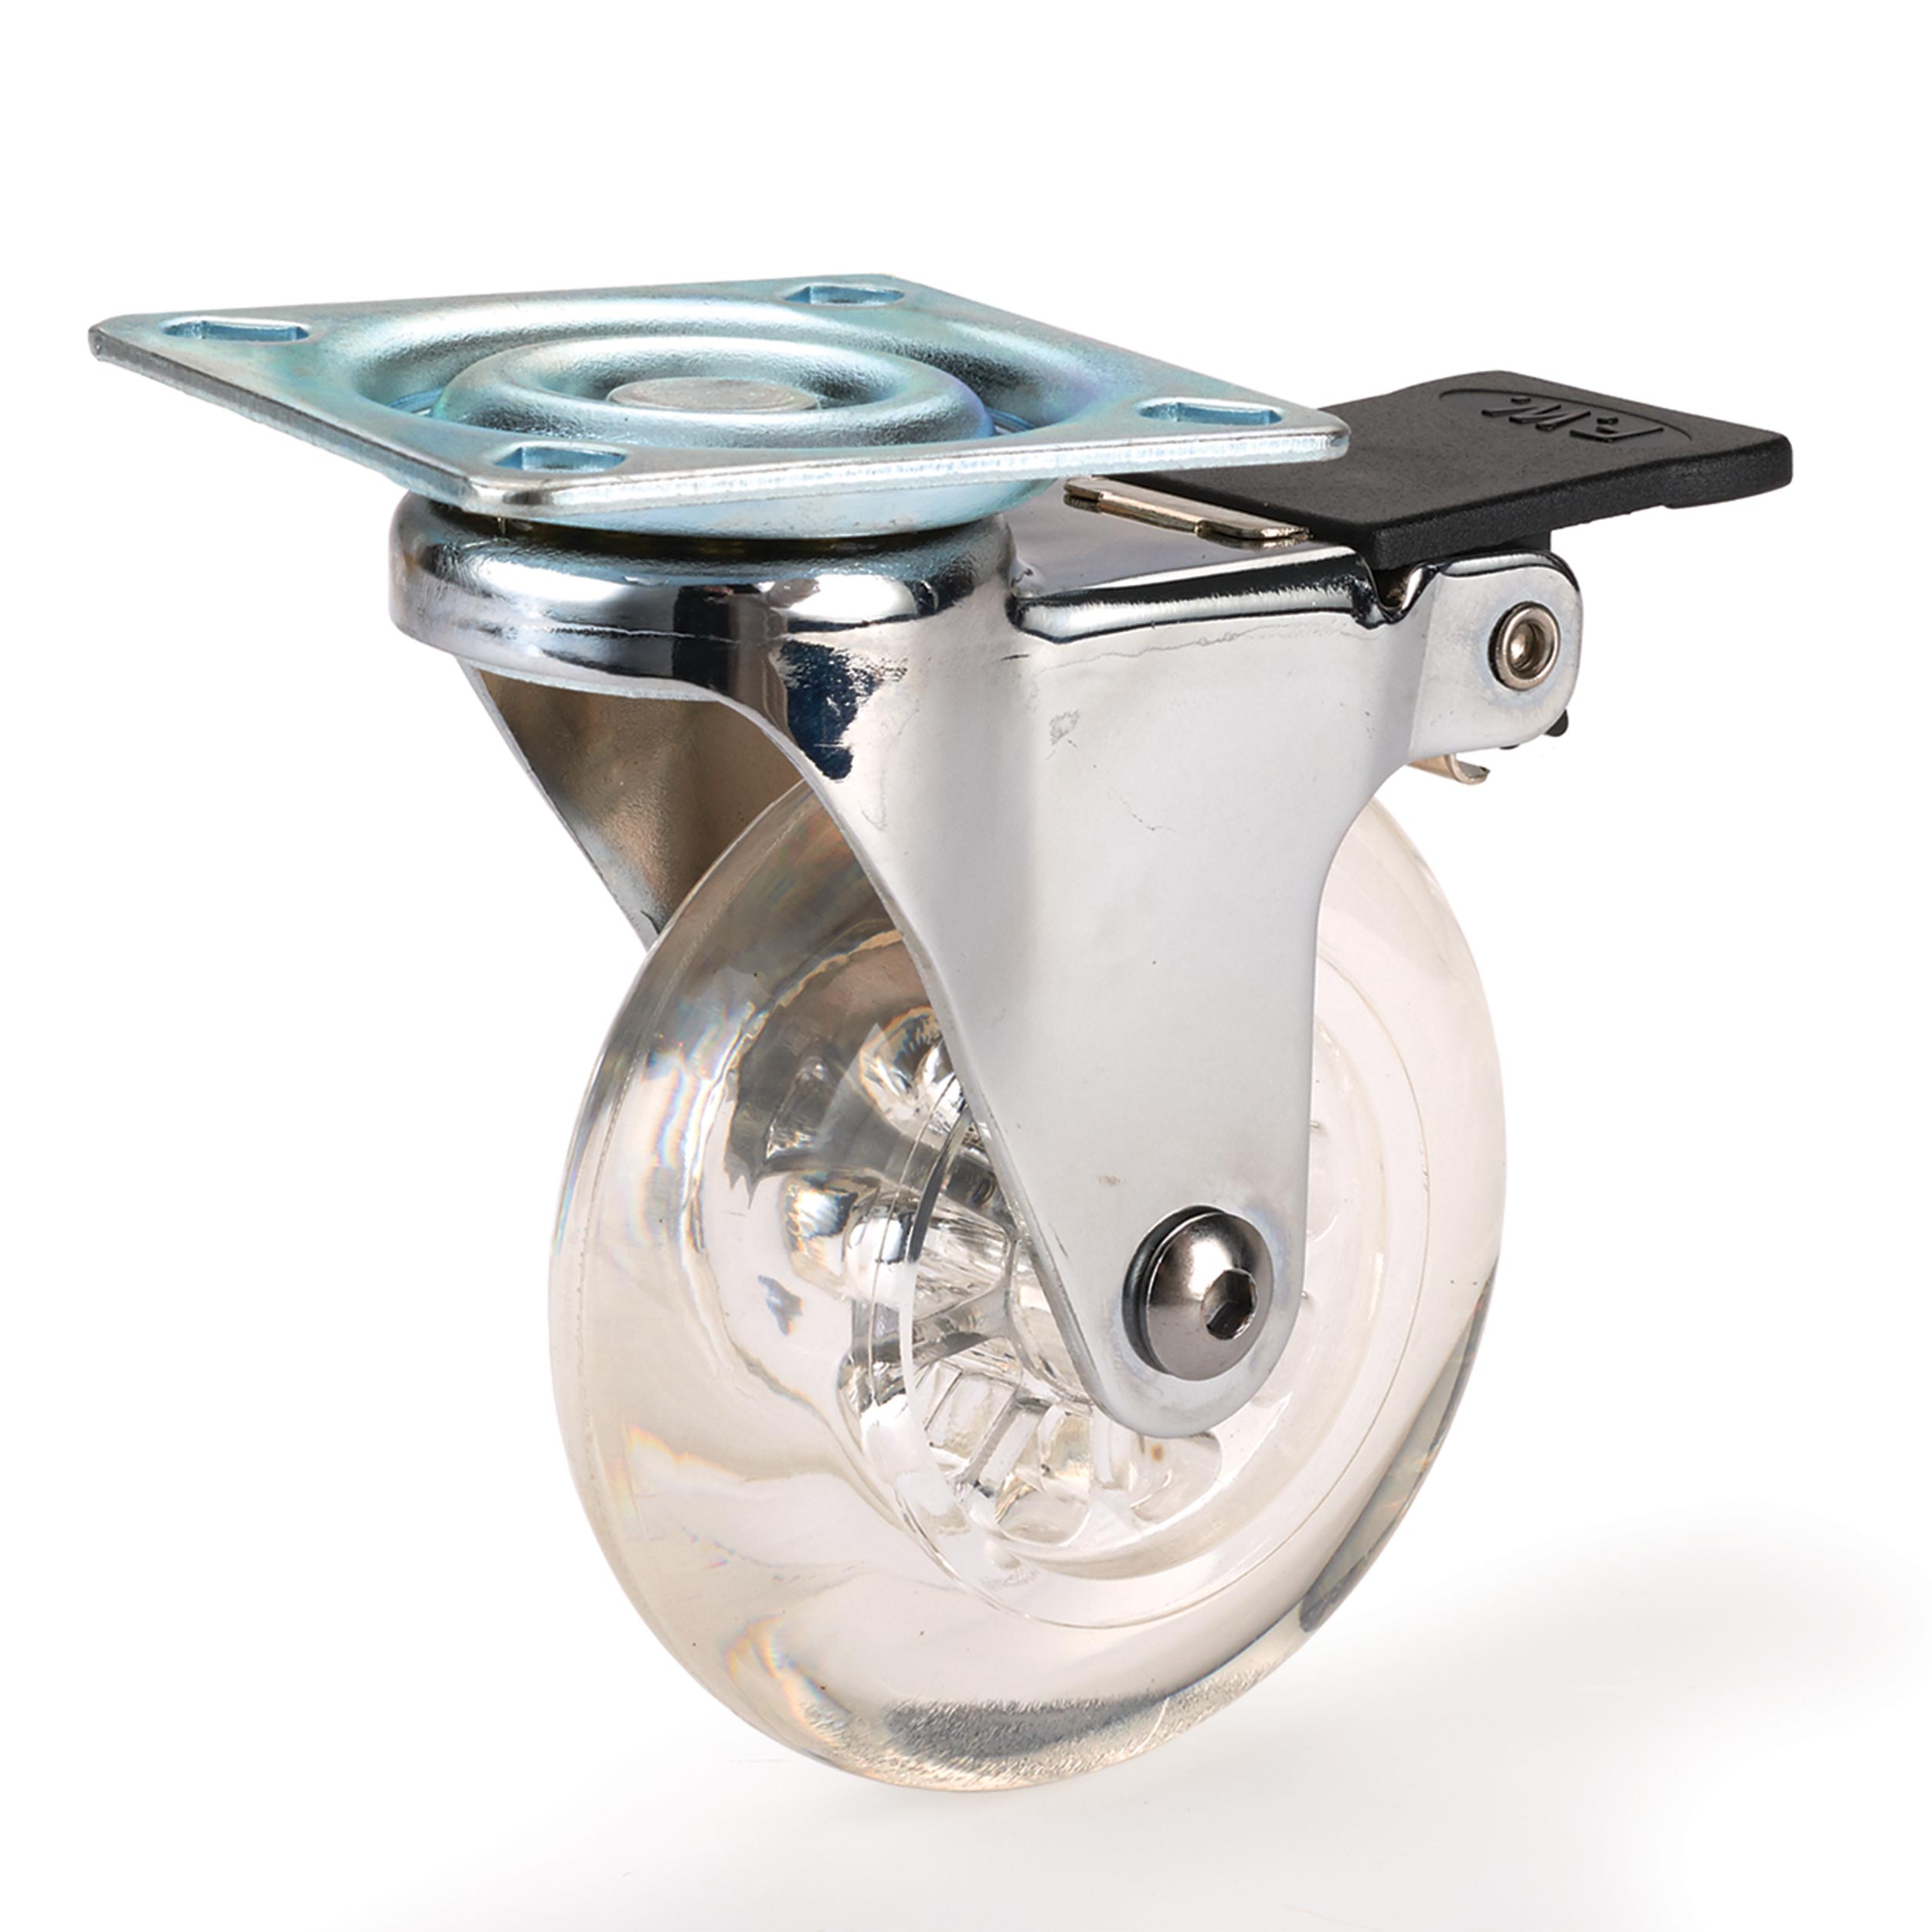 3" Skate Wheel Casters With Rounded Wheel, Translucent, Toe-action Brake